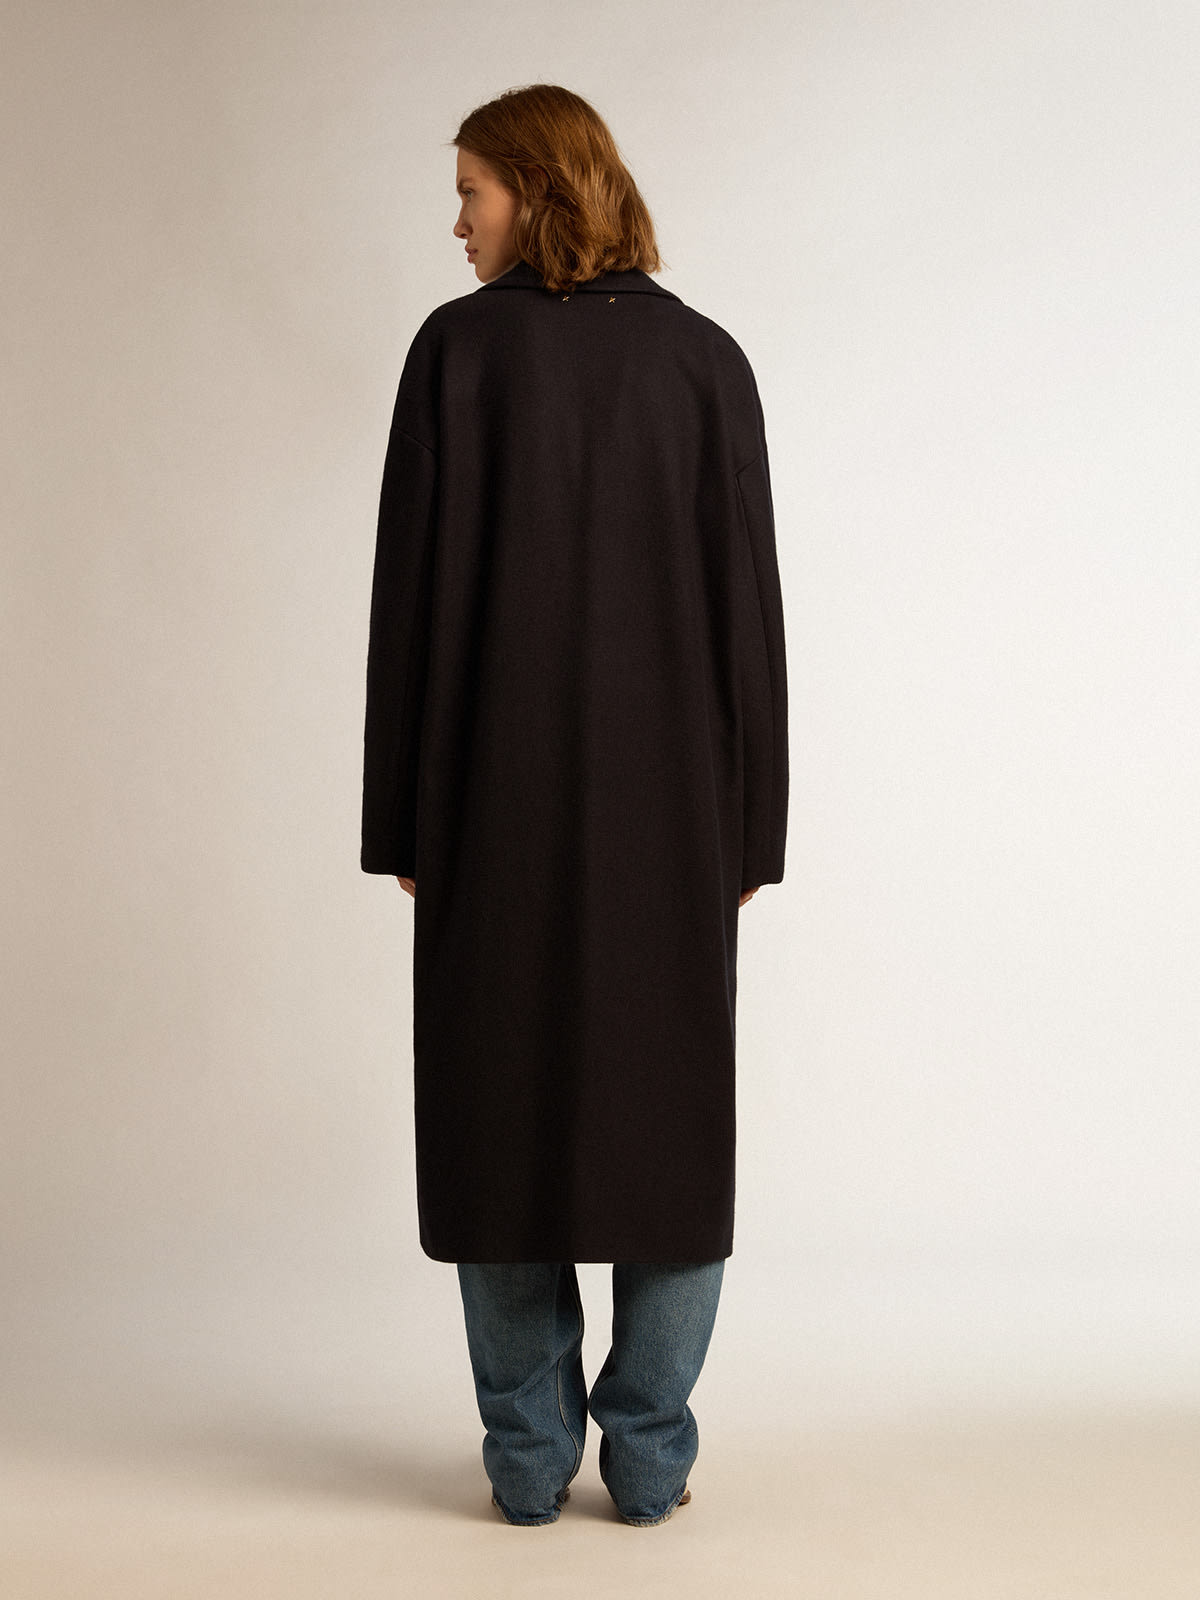 Golden Goose - Women's single-breasted cocoon coat in dark blue wool with gold button in 